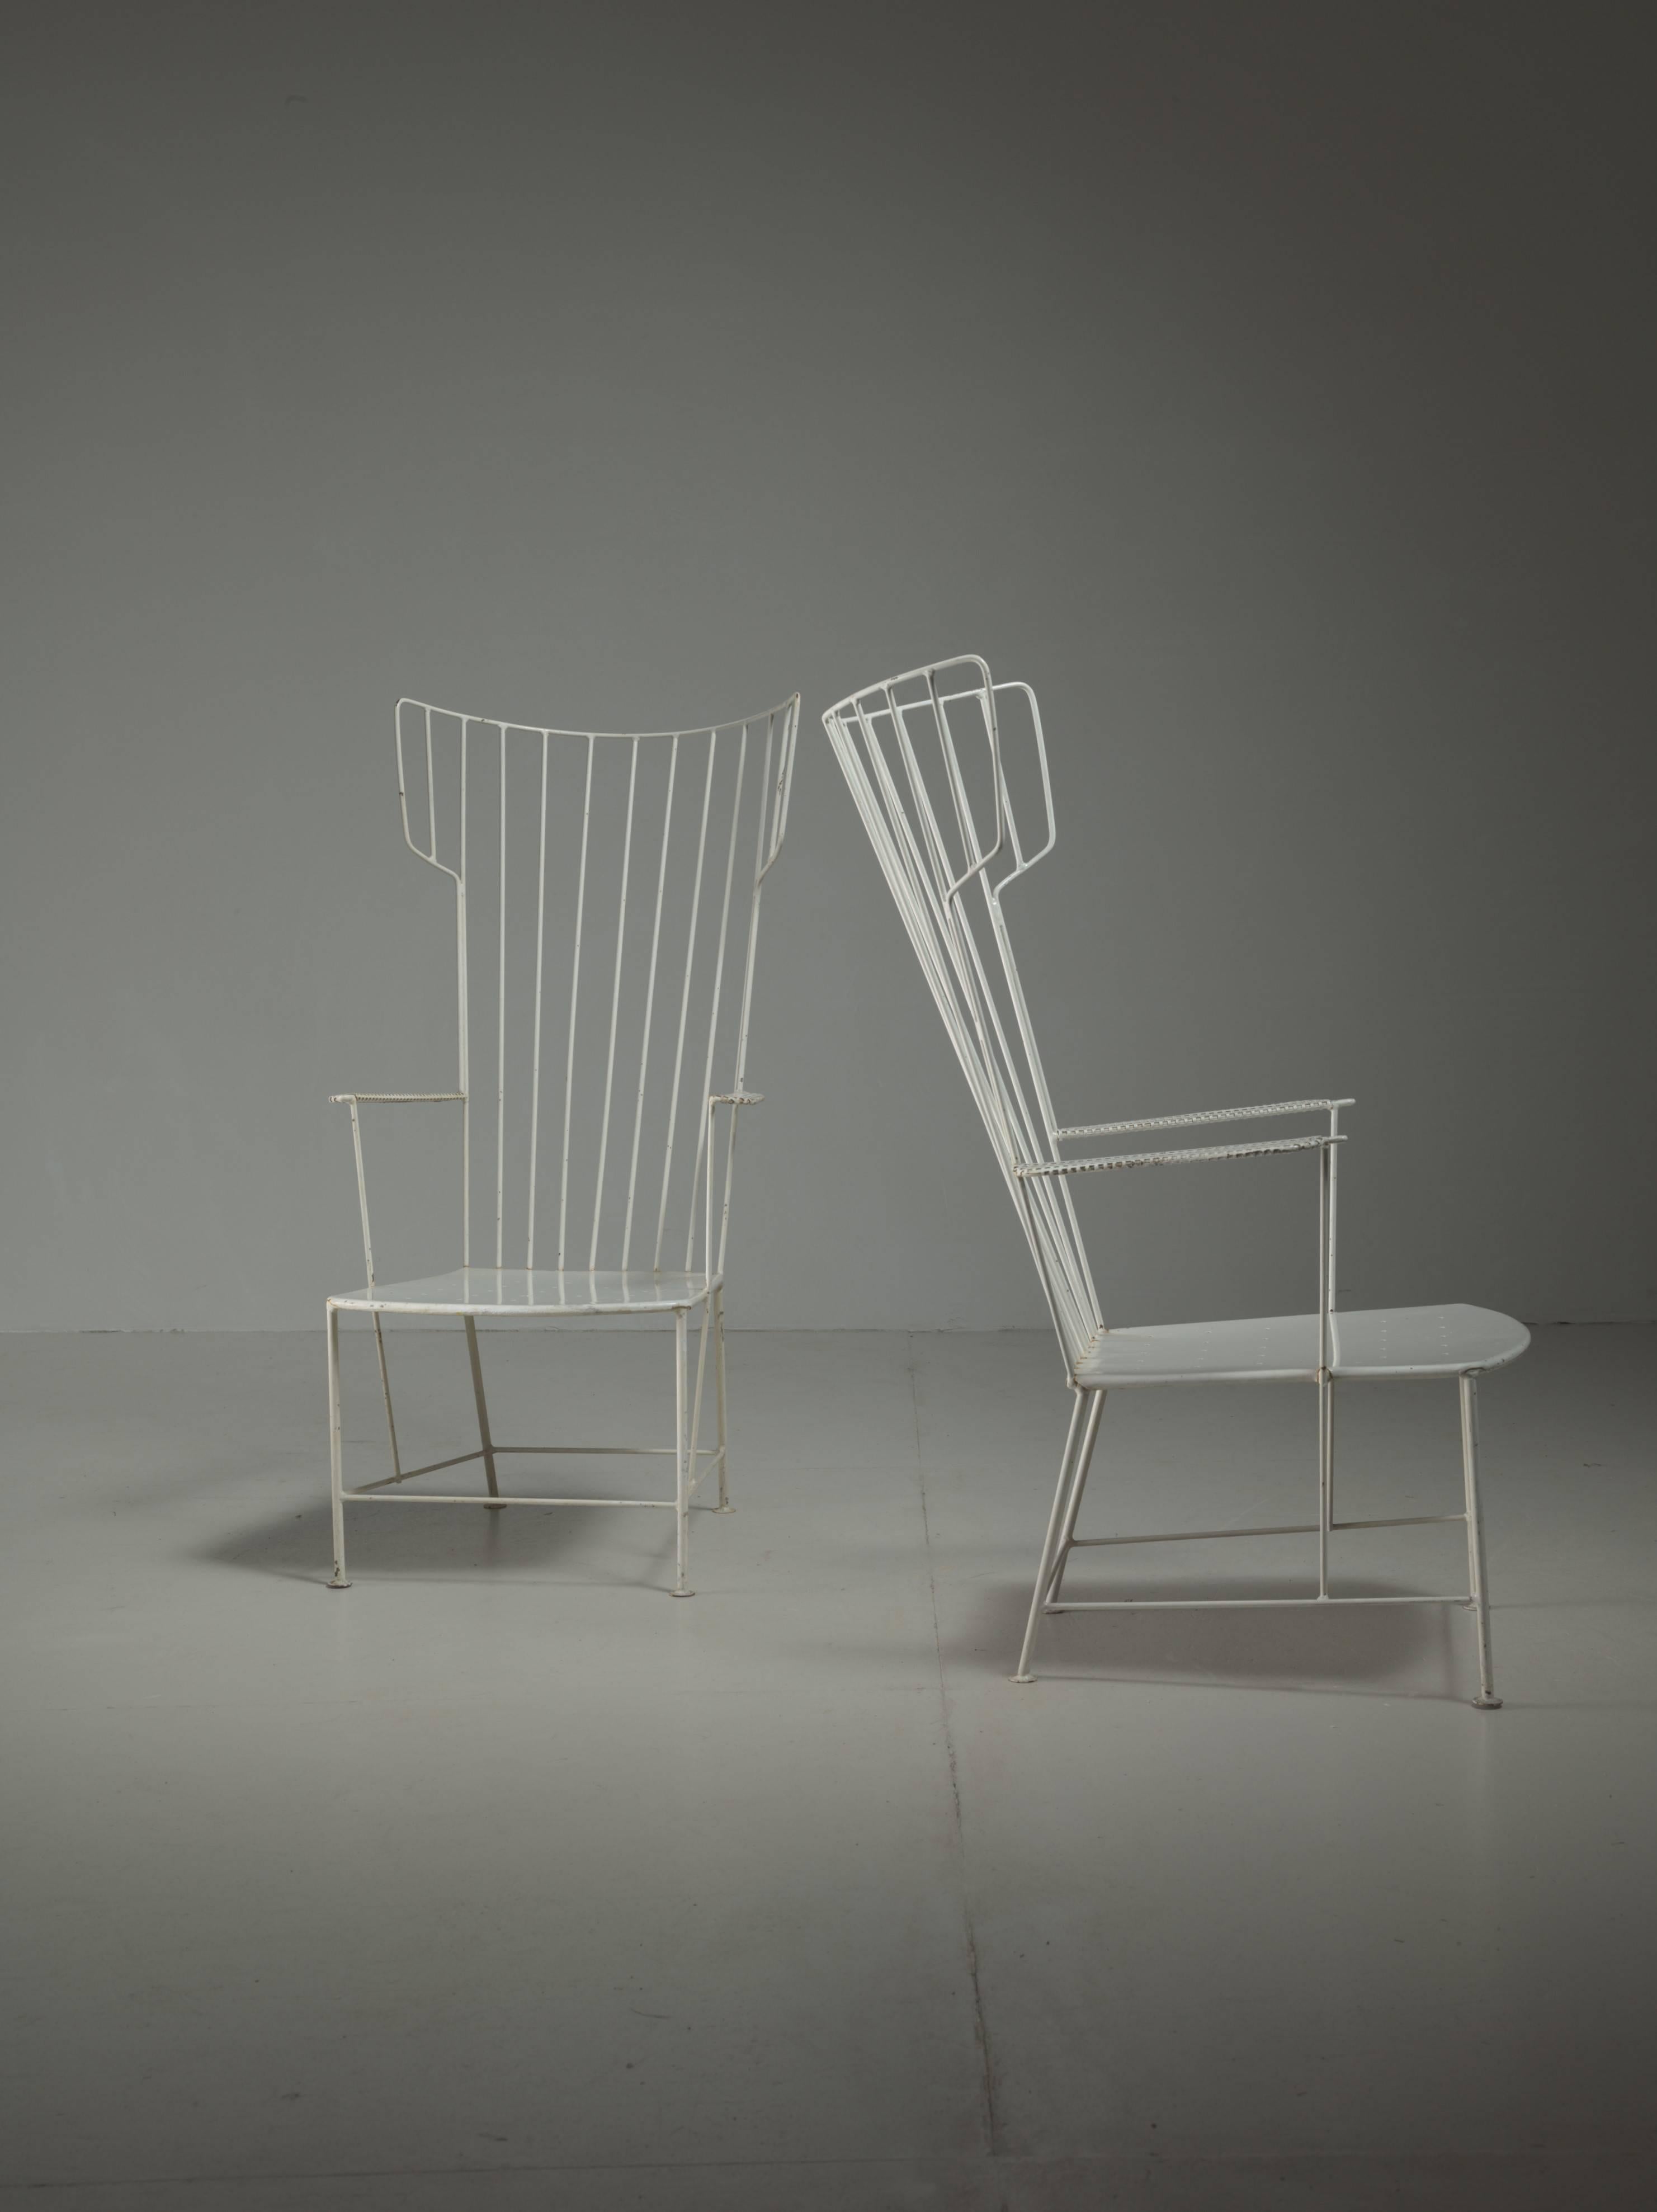 A very rare pair of high, wingback white metal garden chairs by Anna-Lülja Praun & Thomas Lauterbach. These model 'Lyra' chairs were part of the Sonett line and produced by Karl Fostel, Vienna.
Labeled with 'Sonett' and in a very good